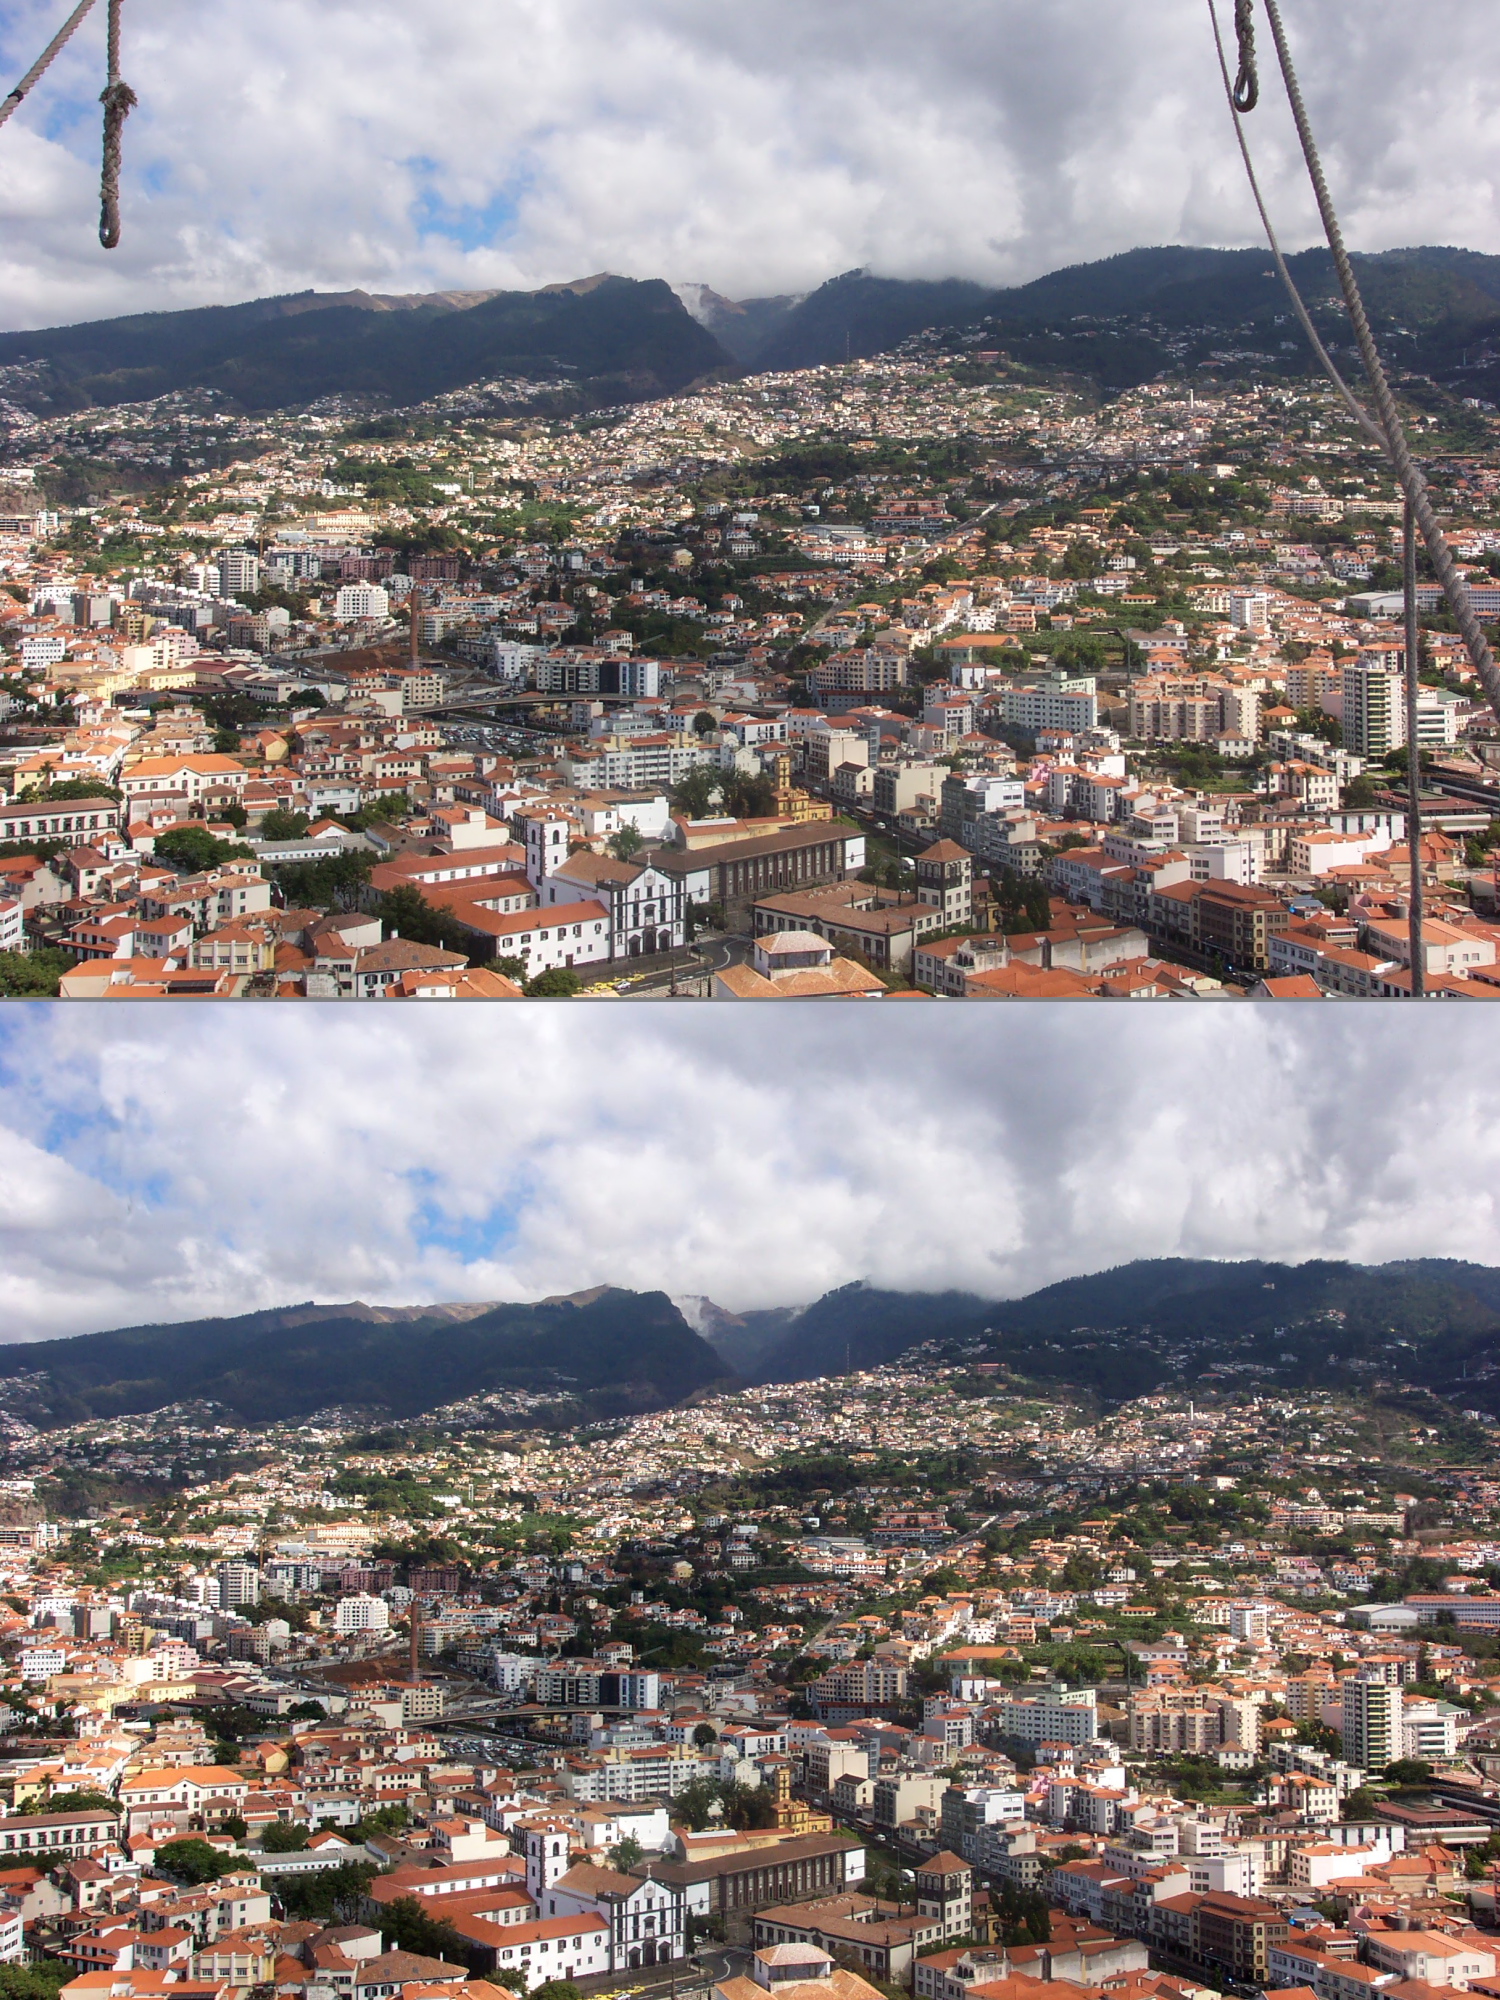 Before and after comparison of a high up shot across a town, to remove some rope that were in the foreground